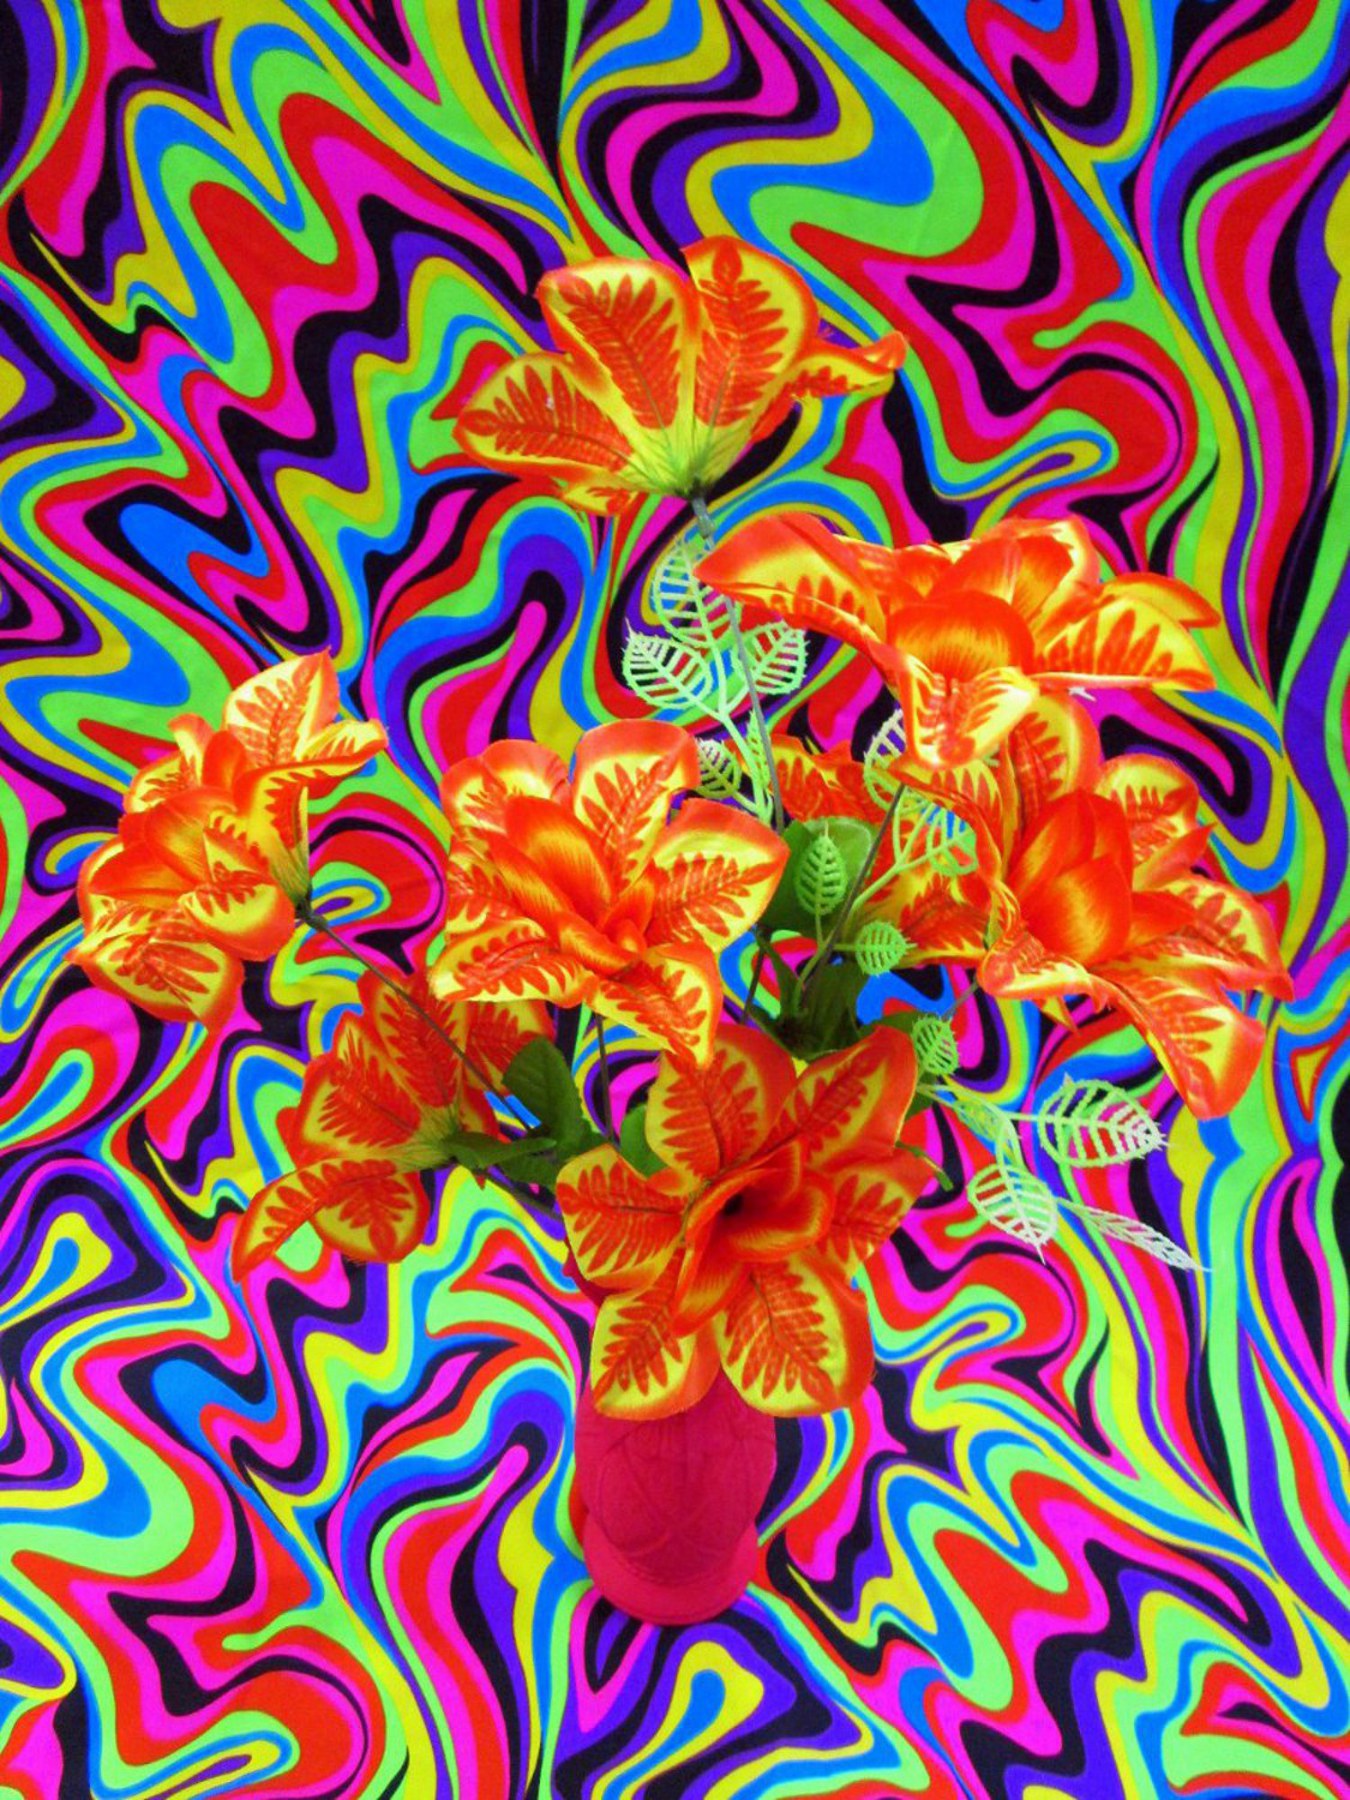 1550061064715-2-Can-You-Dig-It-A-Chromatic-Series-of-Floral-Arrangements-Orange